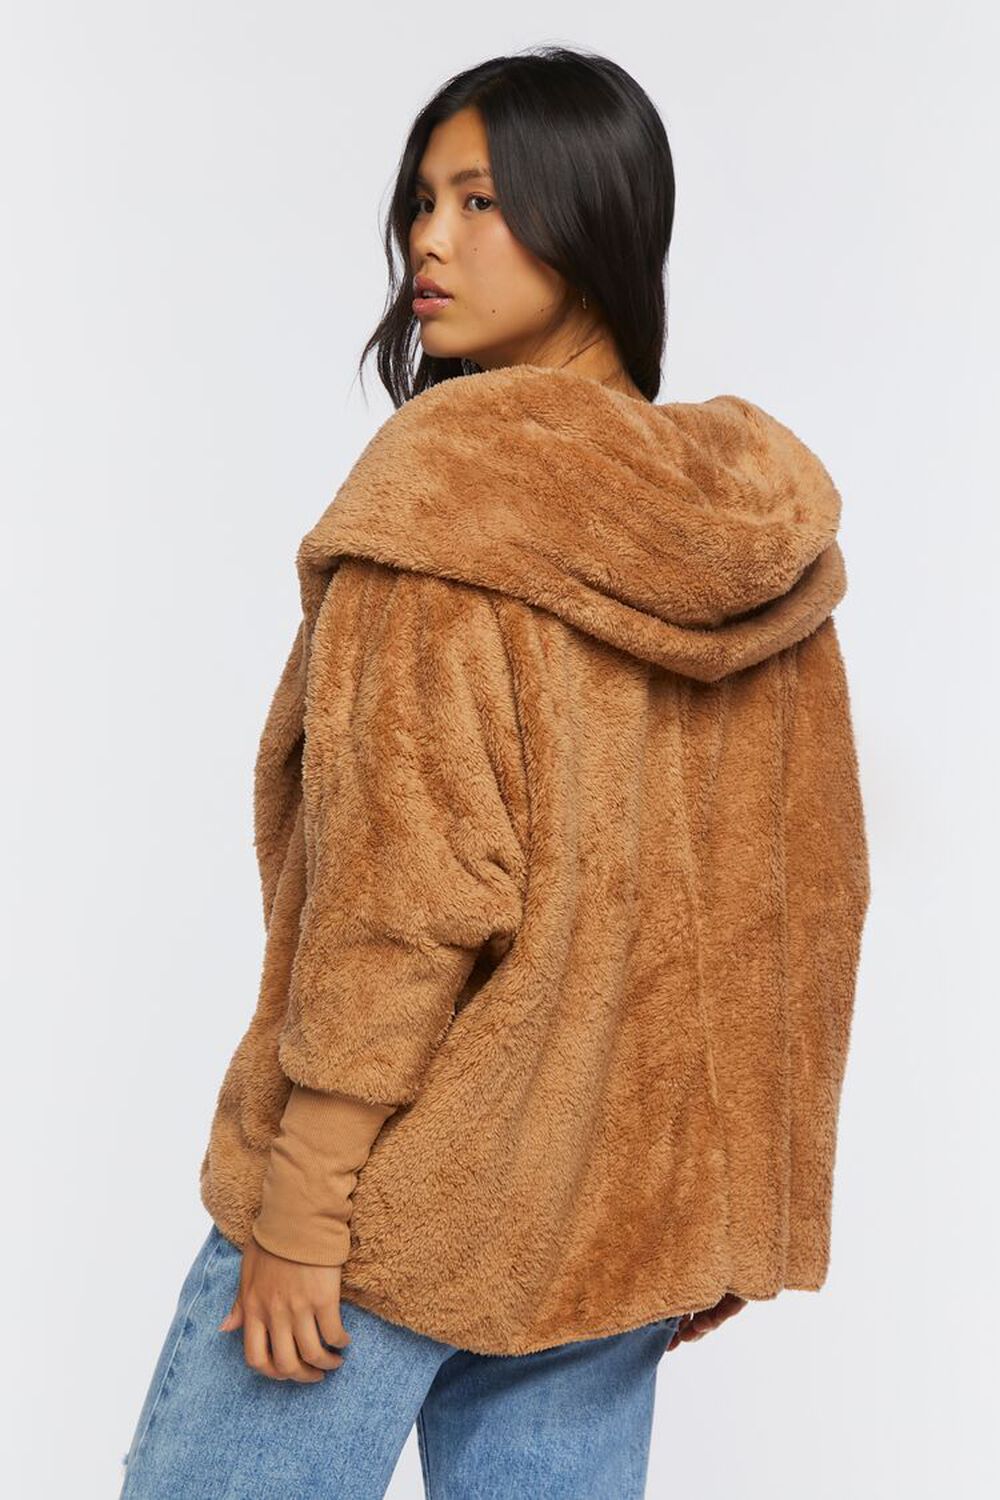 TAUPE Faux Shearling Hooded Jacket, image 3